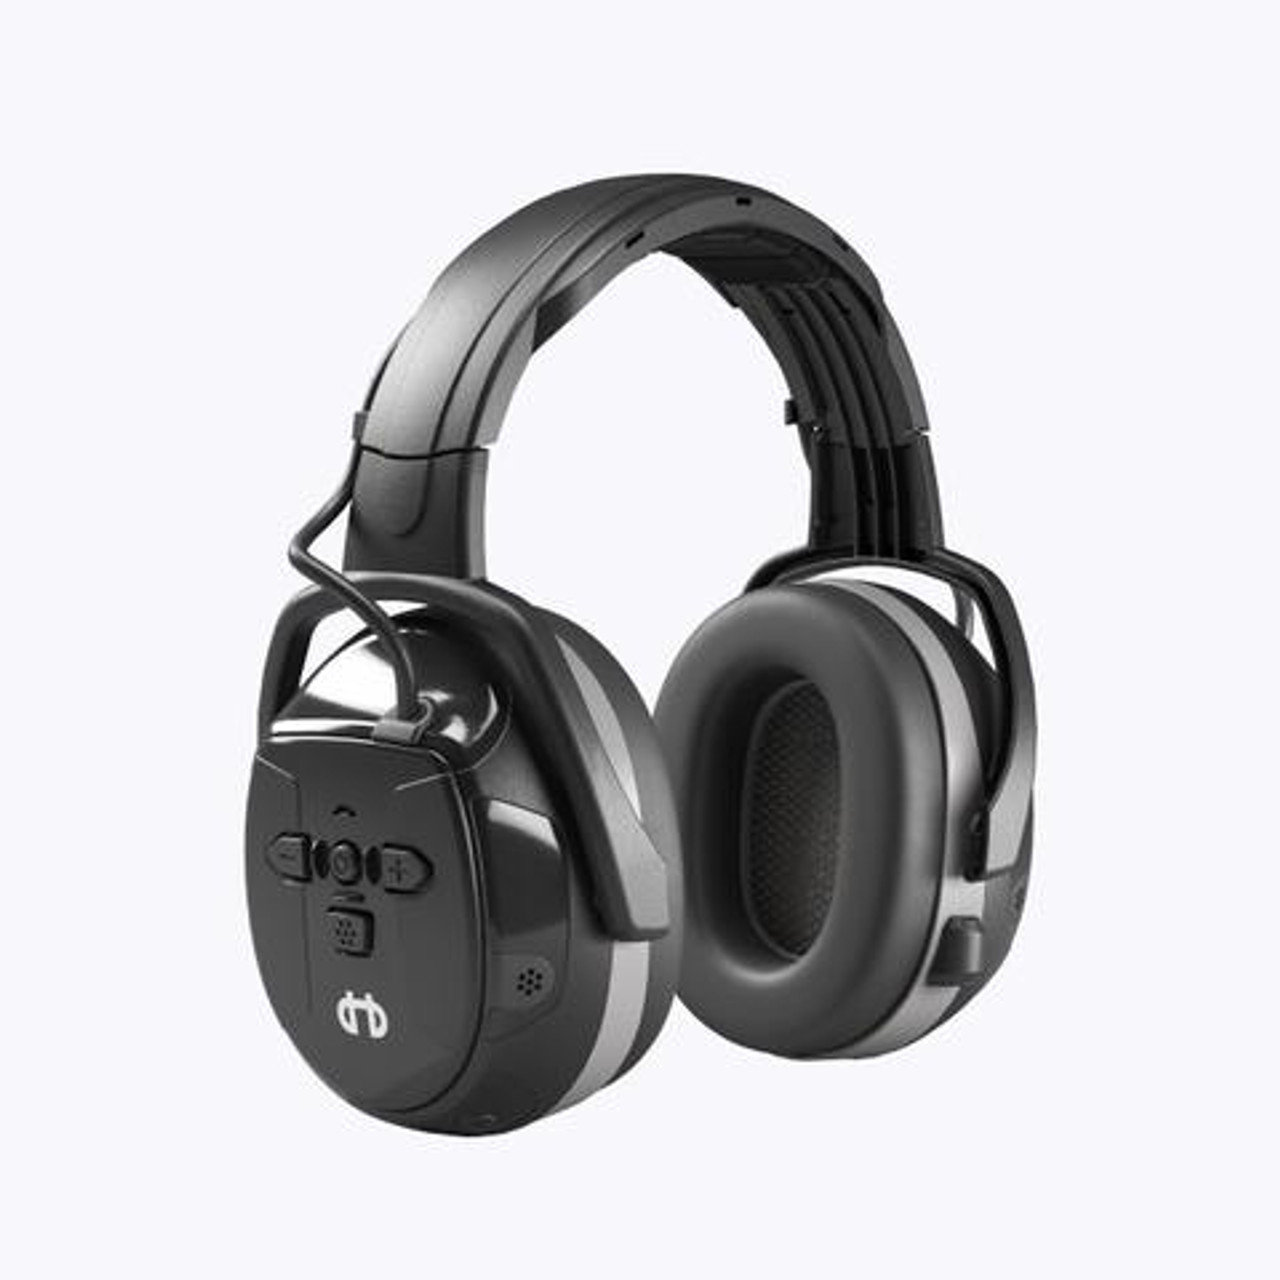 HELLBERG Ear Muffs | Xstream LD Class 2 Waterproof, Active Monitoring and Bluetooth Earmuffs  with Headband for Excavator Operators, Landscapers and Rail Industry